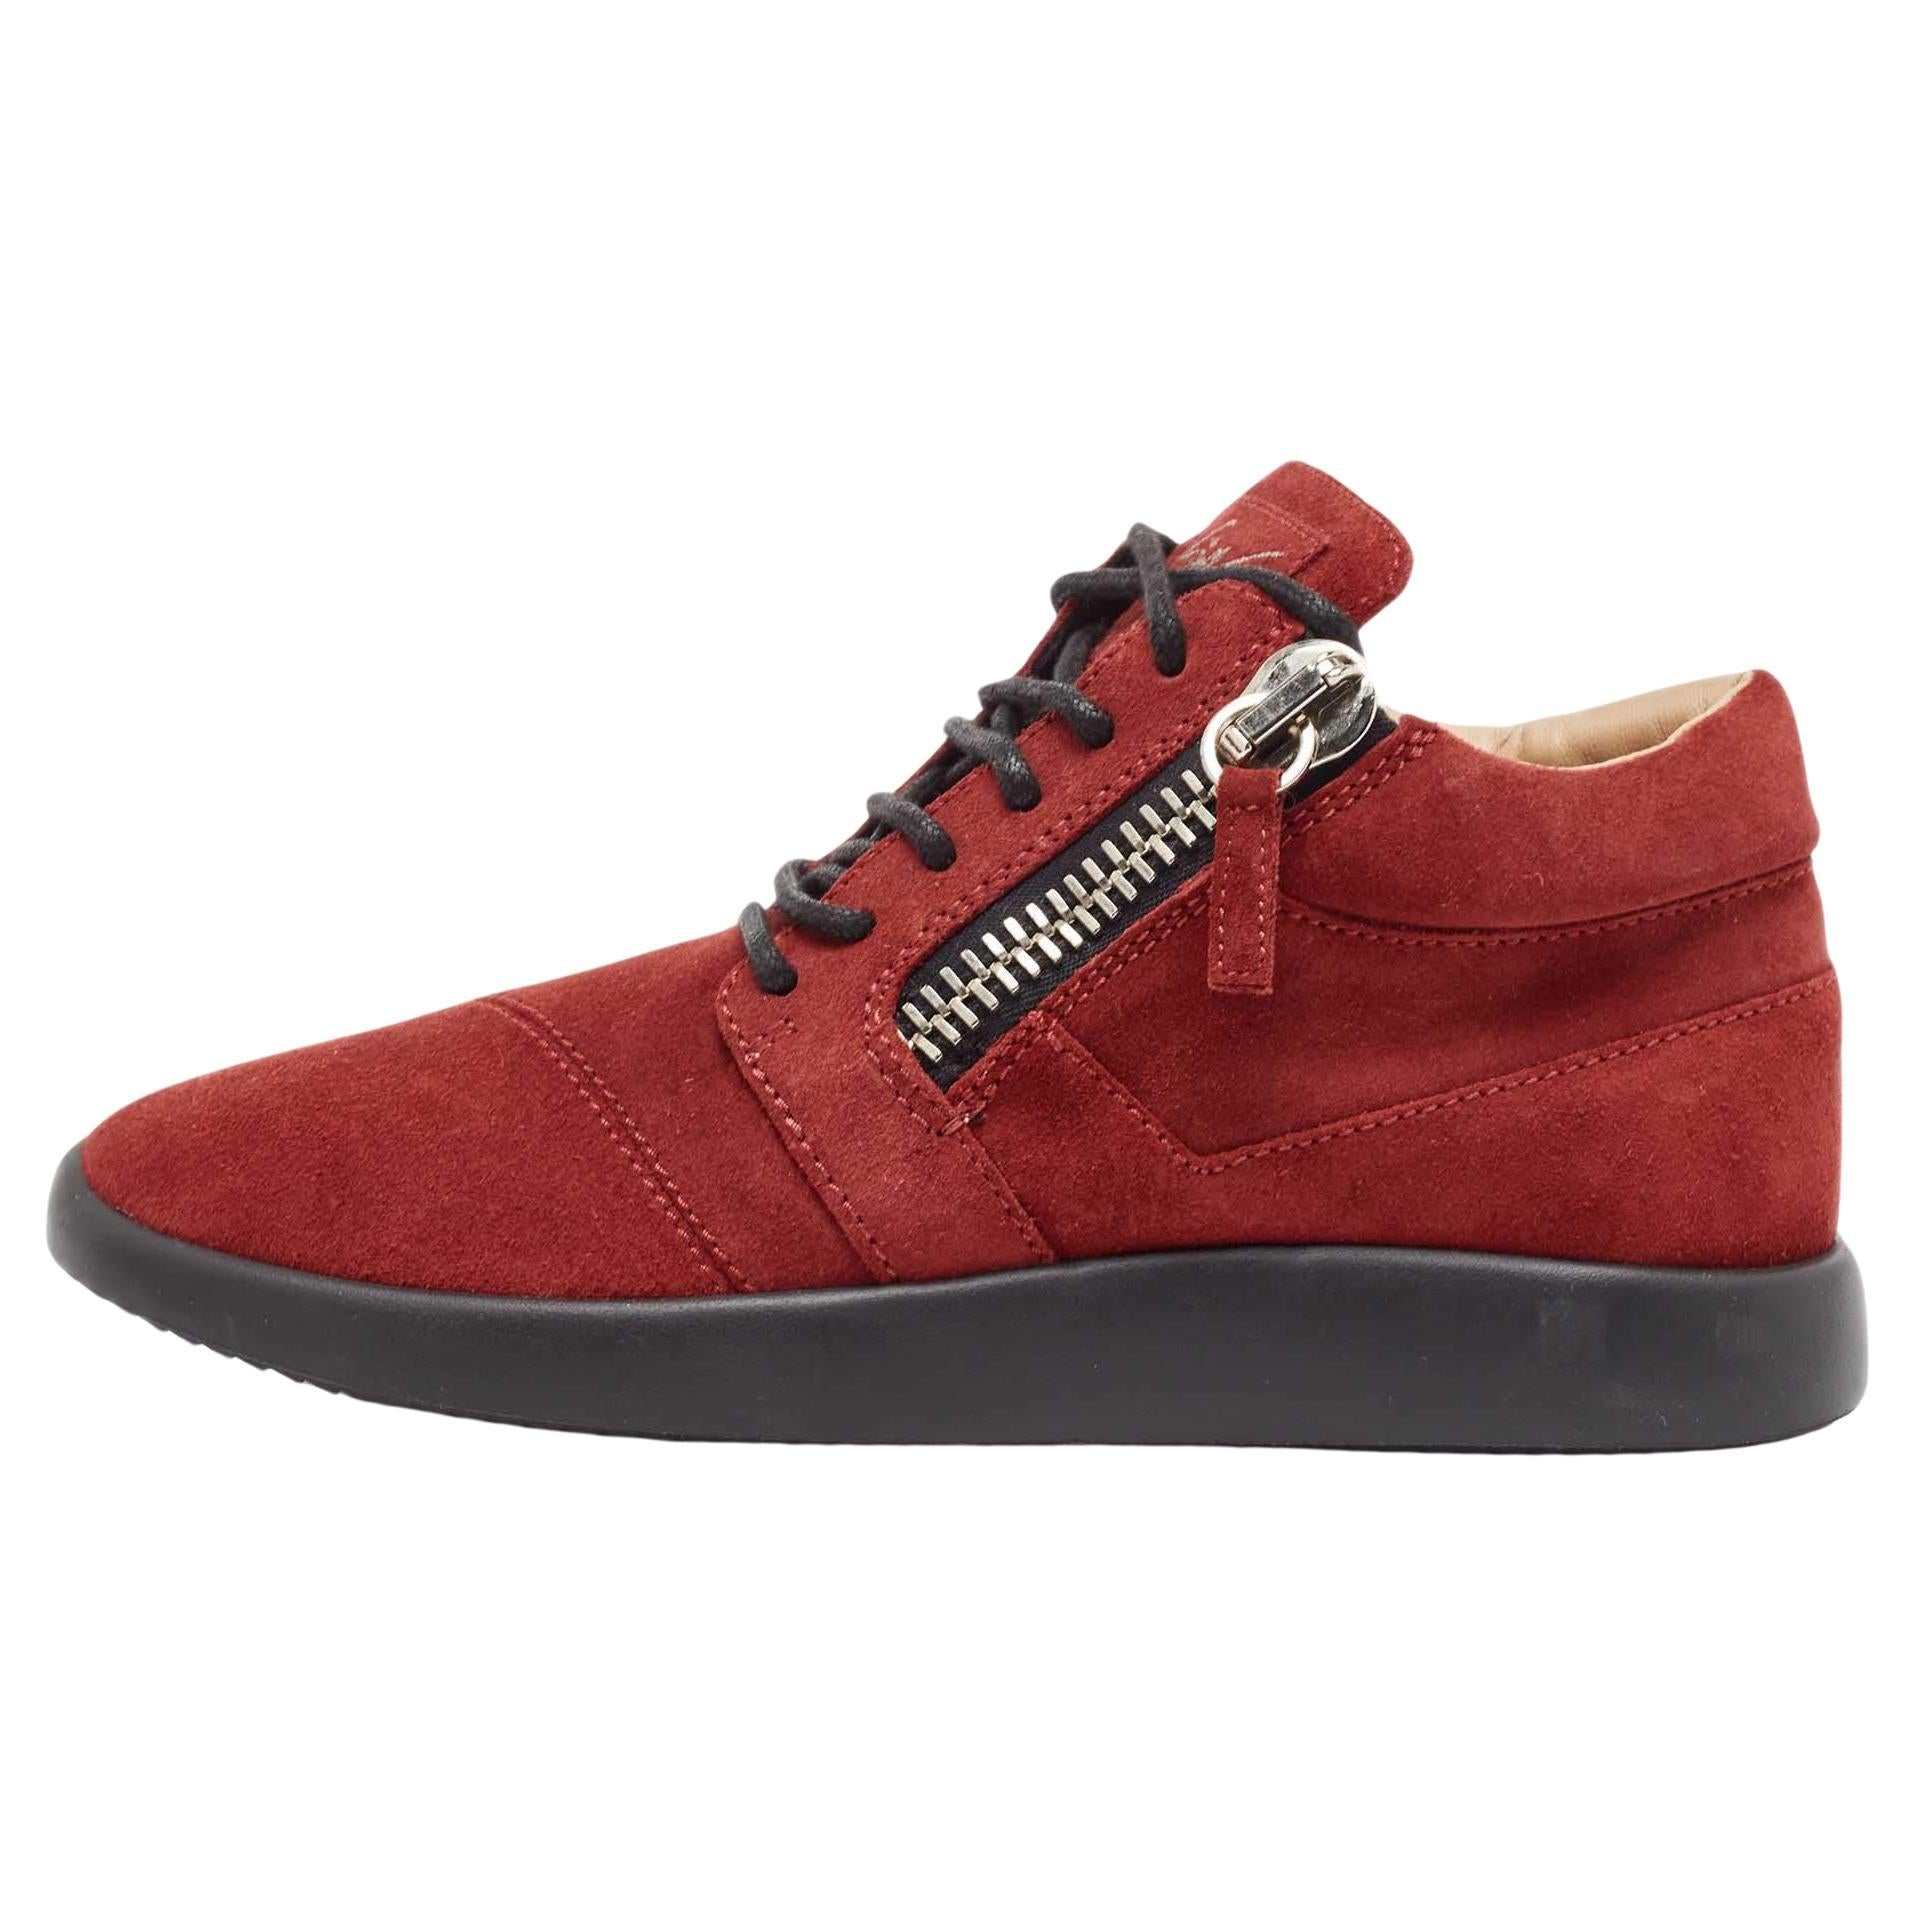 Gisueppe Zanotti Red Suede Double Zip Low Top Sneakers Size 38 For Sale